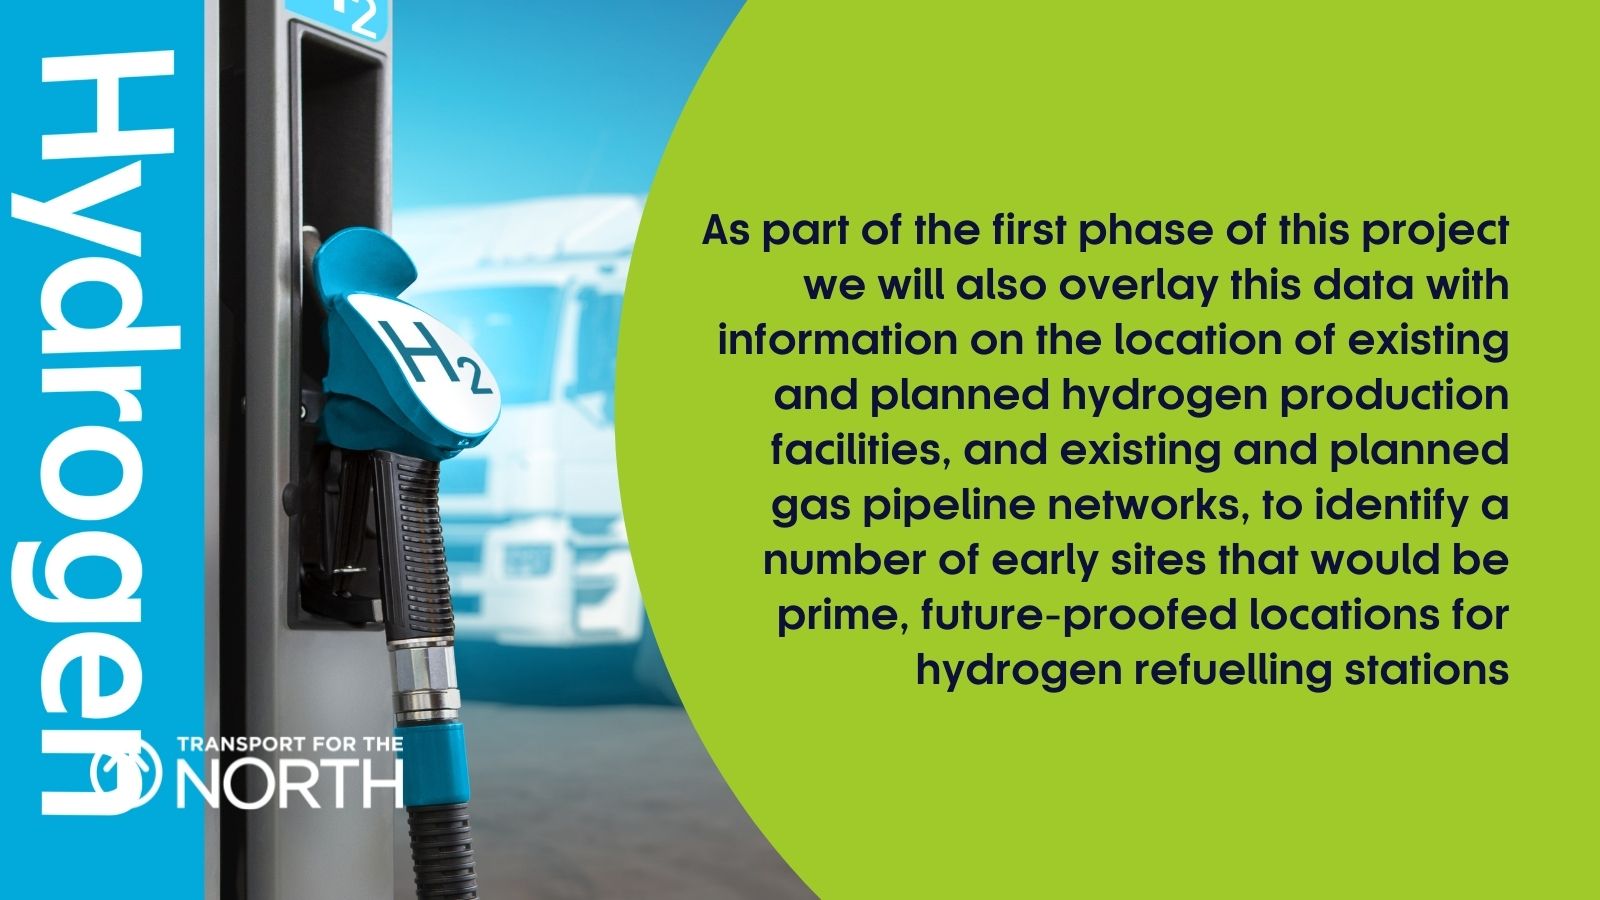 Data to identify locations for hydrogen refuelling stations